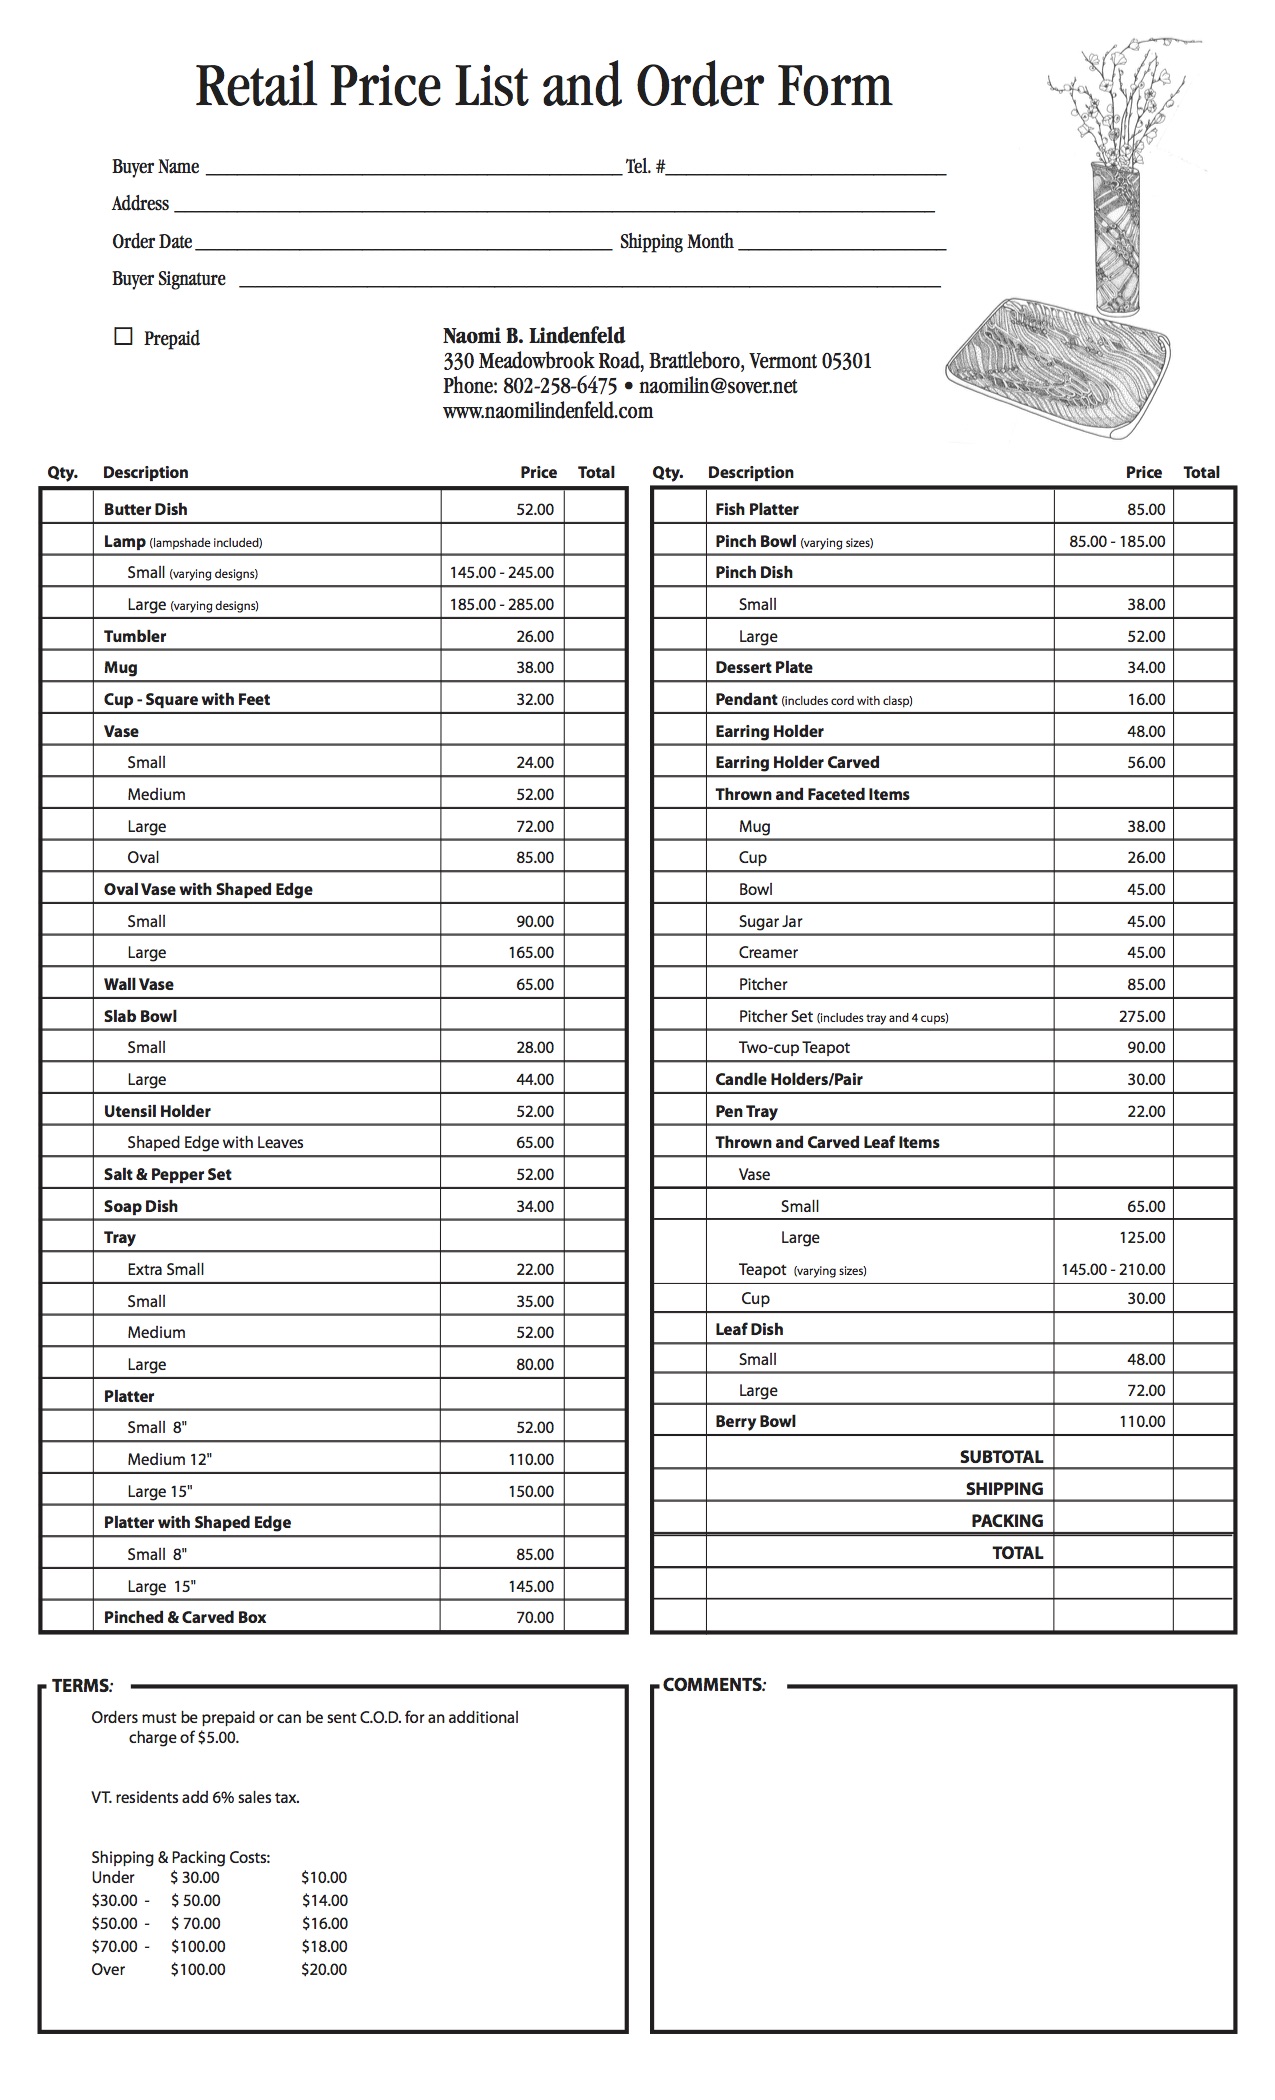 Retail Price List and Order Form 2016